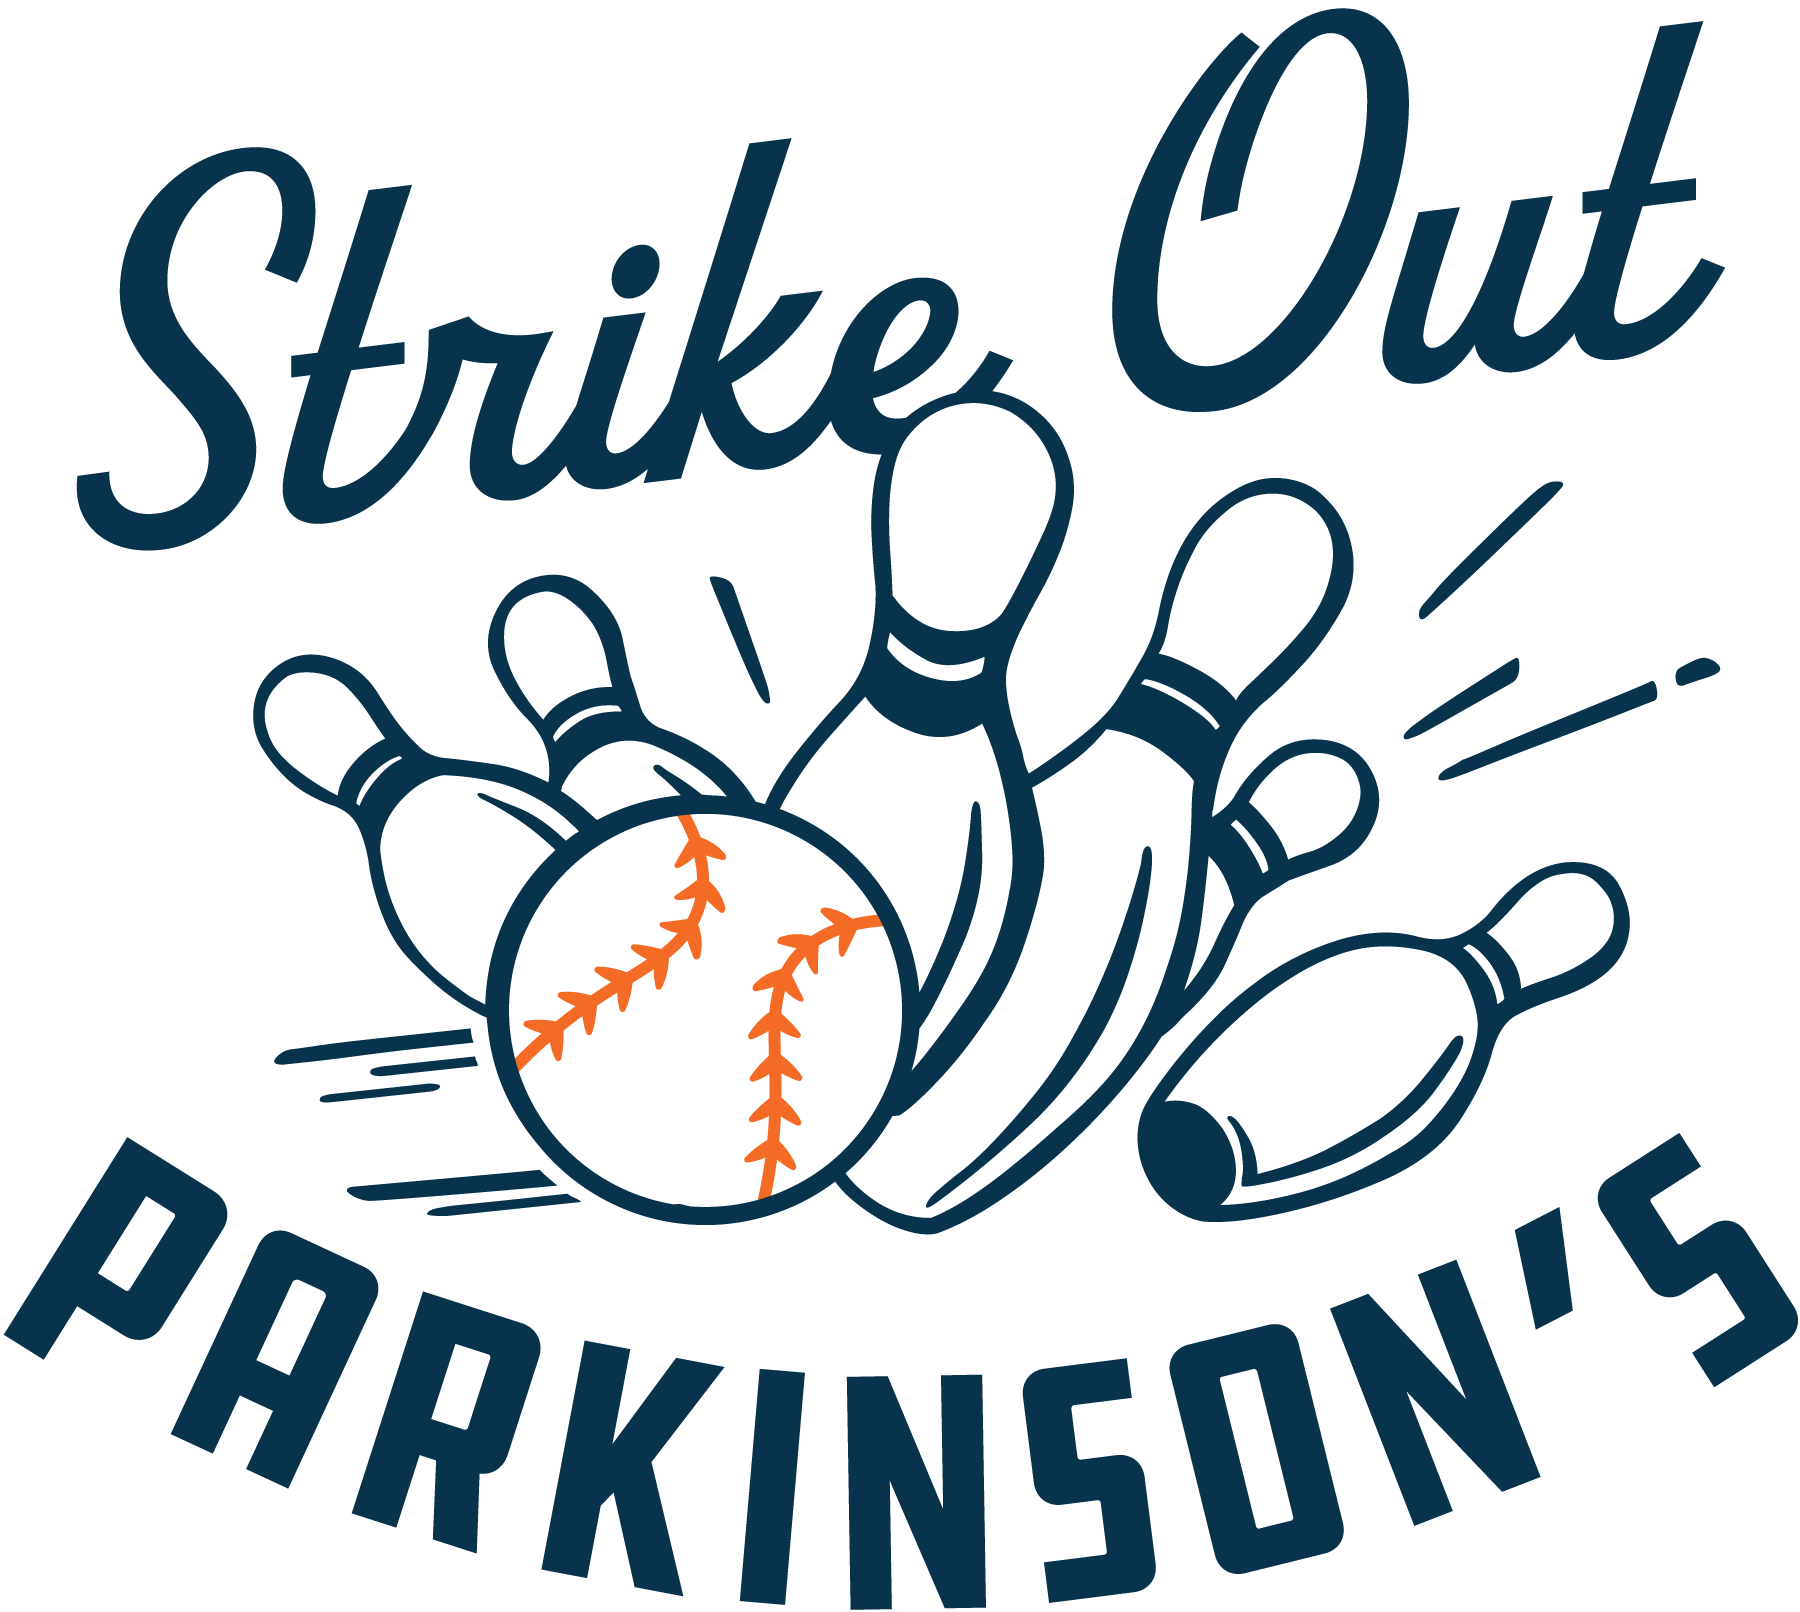 Kirk Gibson Foundation, Born in Detroit Apparel partner for Parkinson's  cause